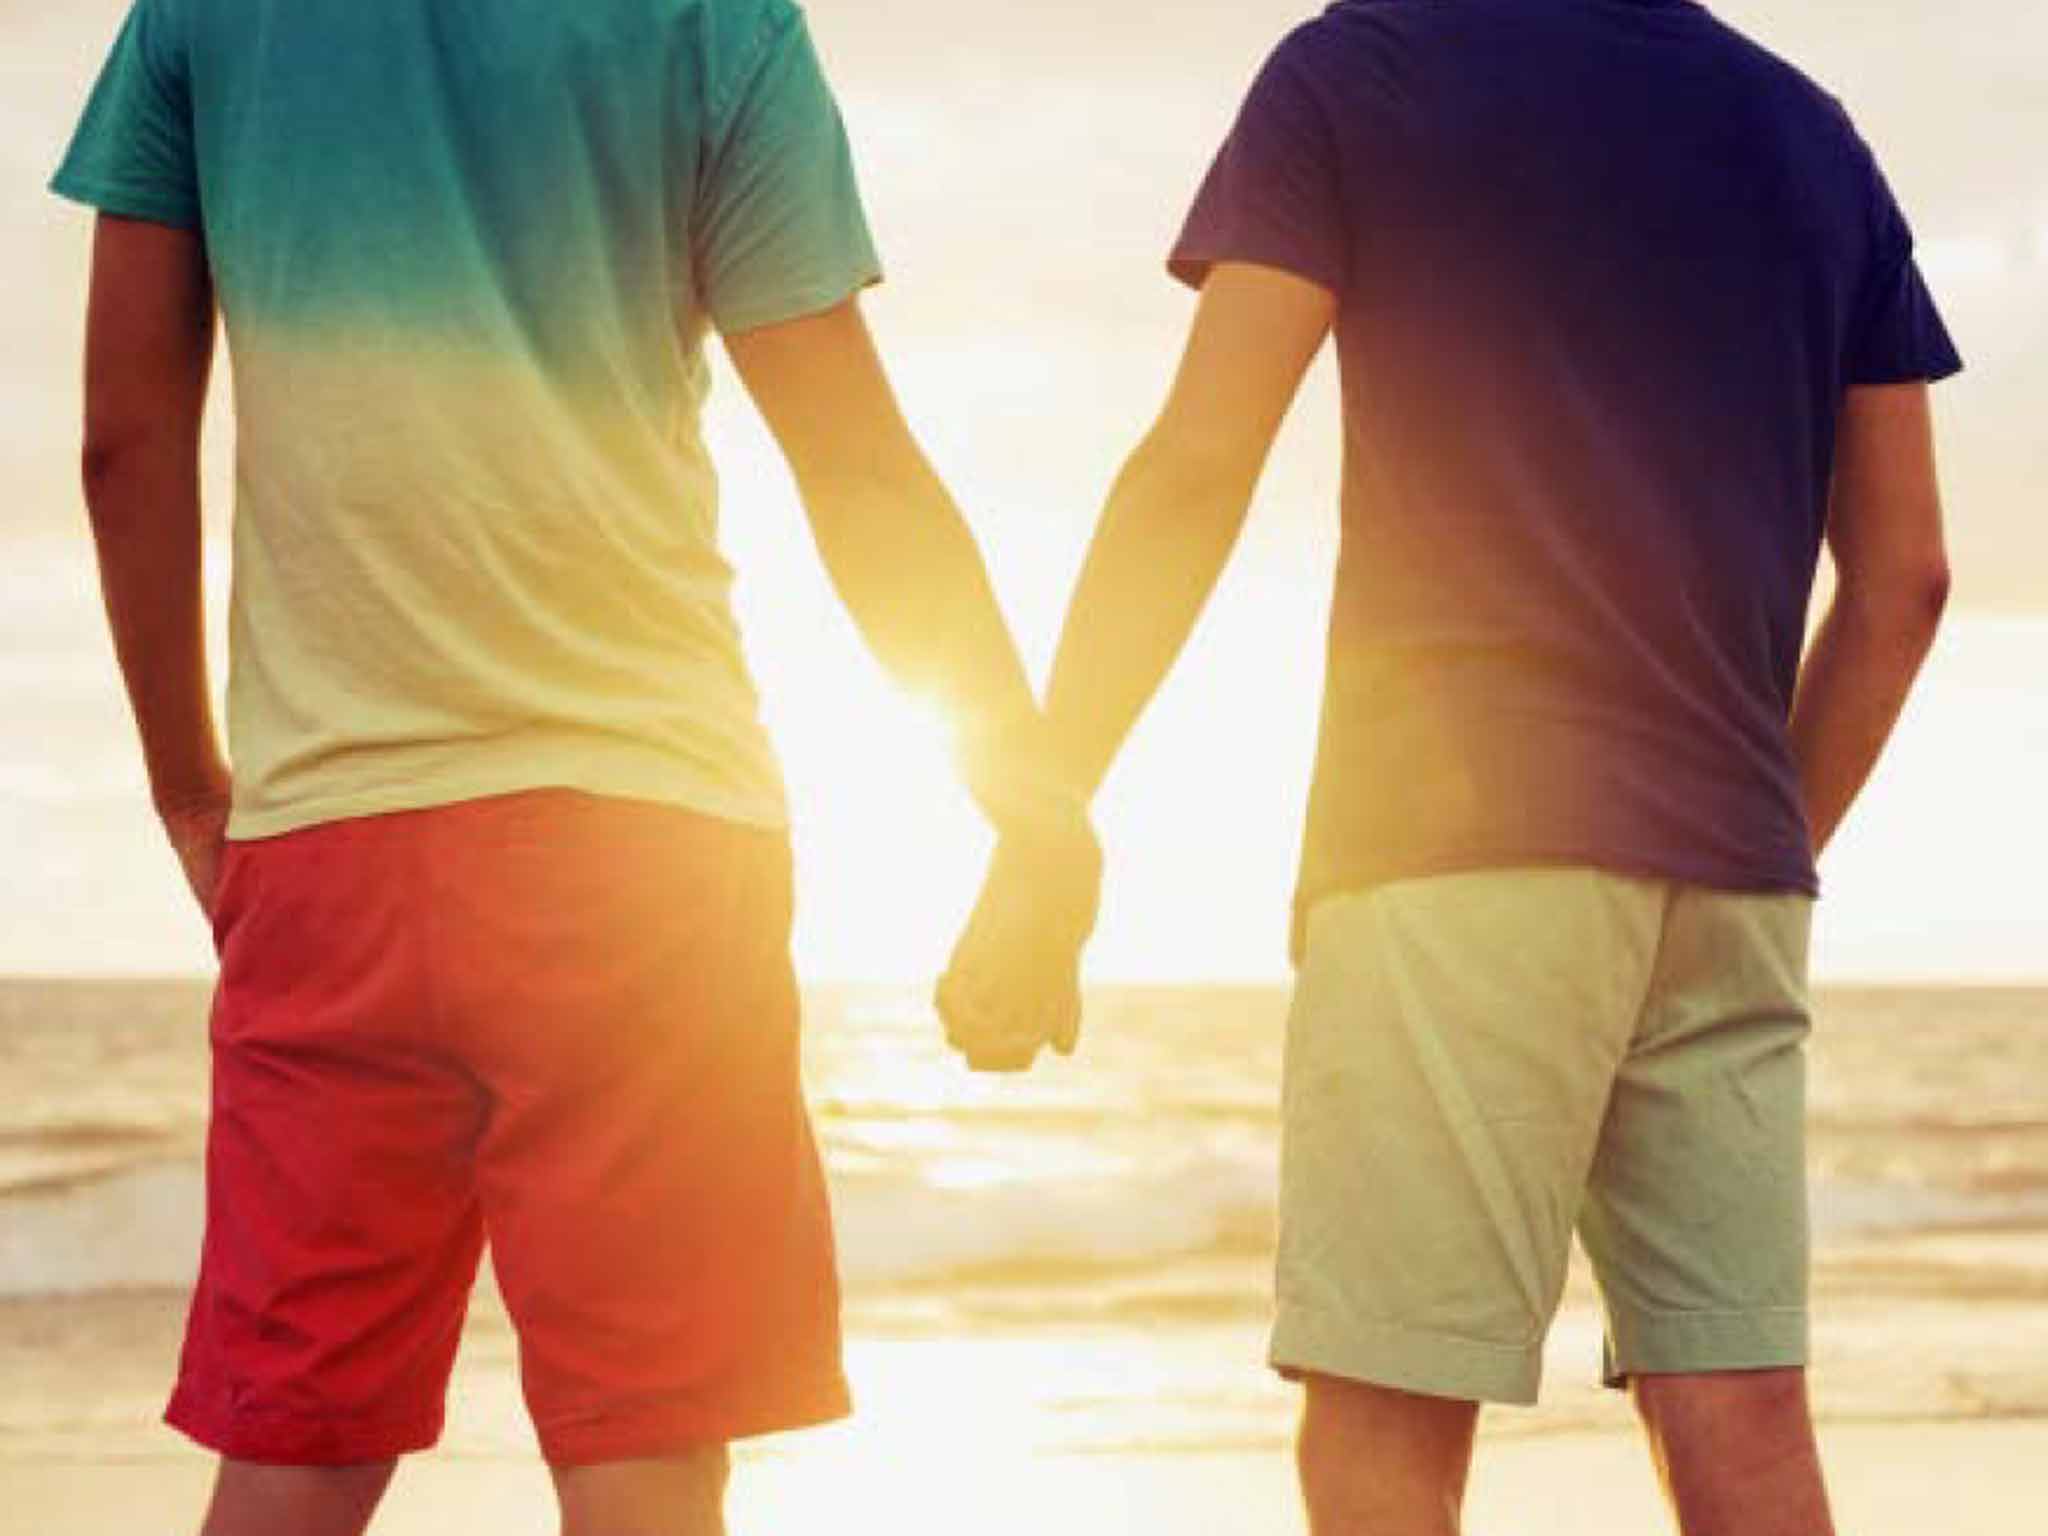 Many same sex couples remain unsure about showing affection on holiday